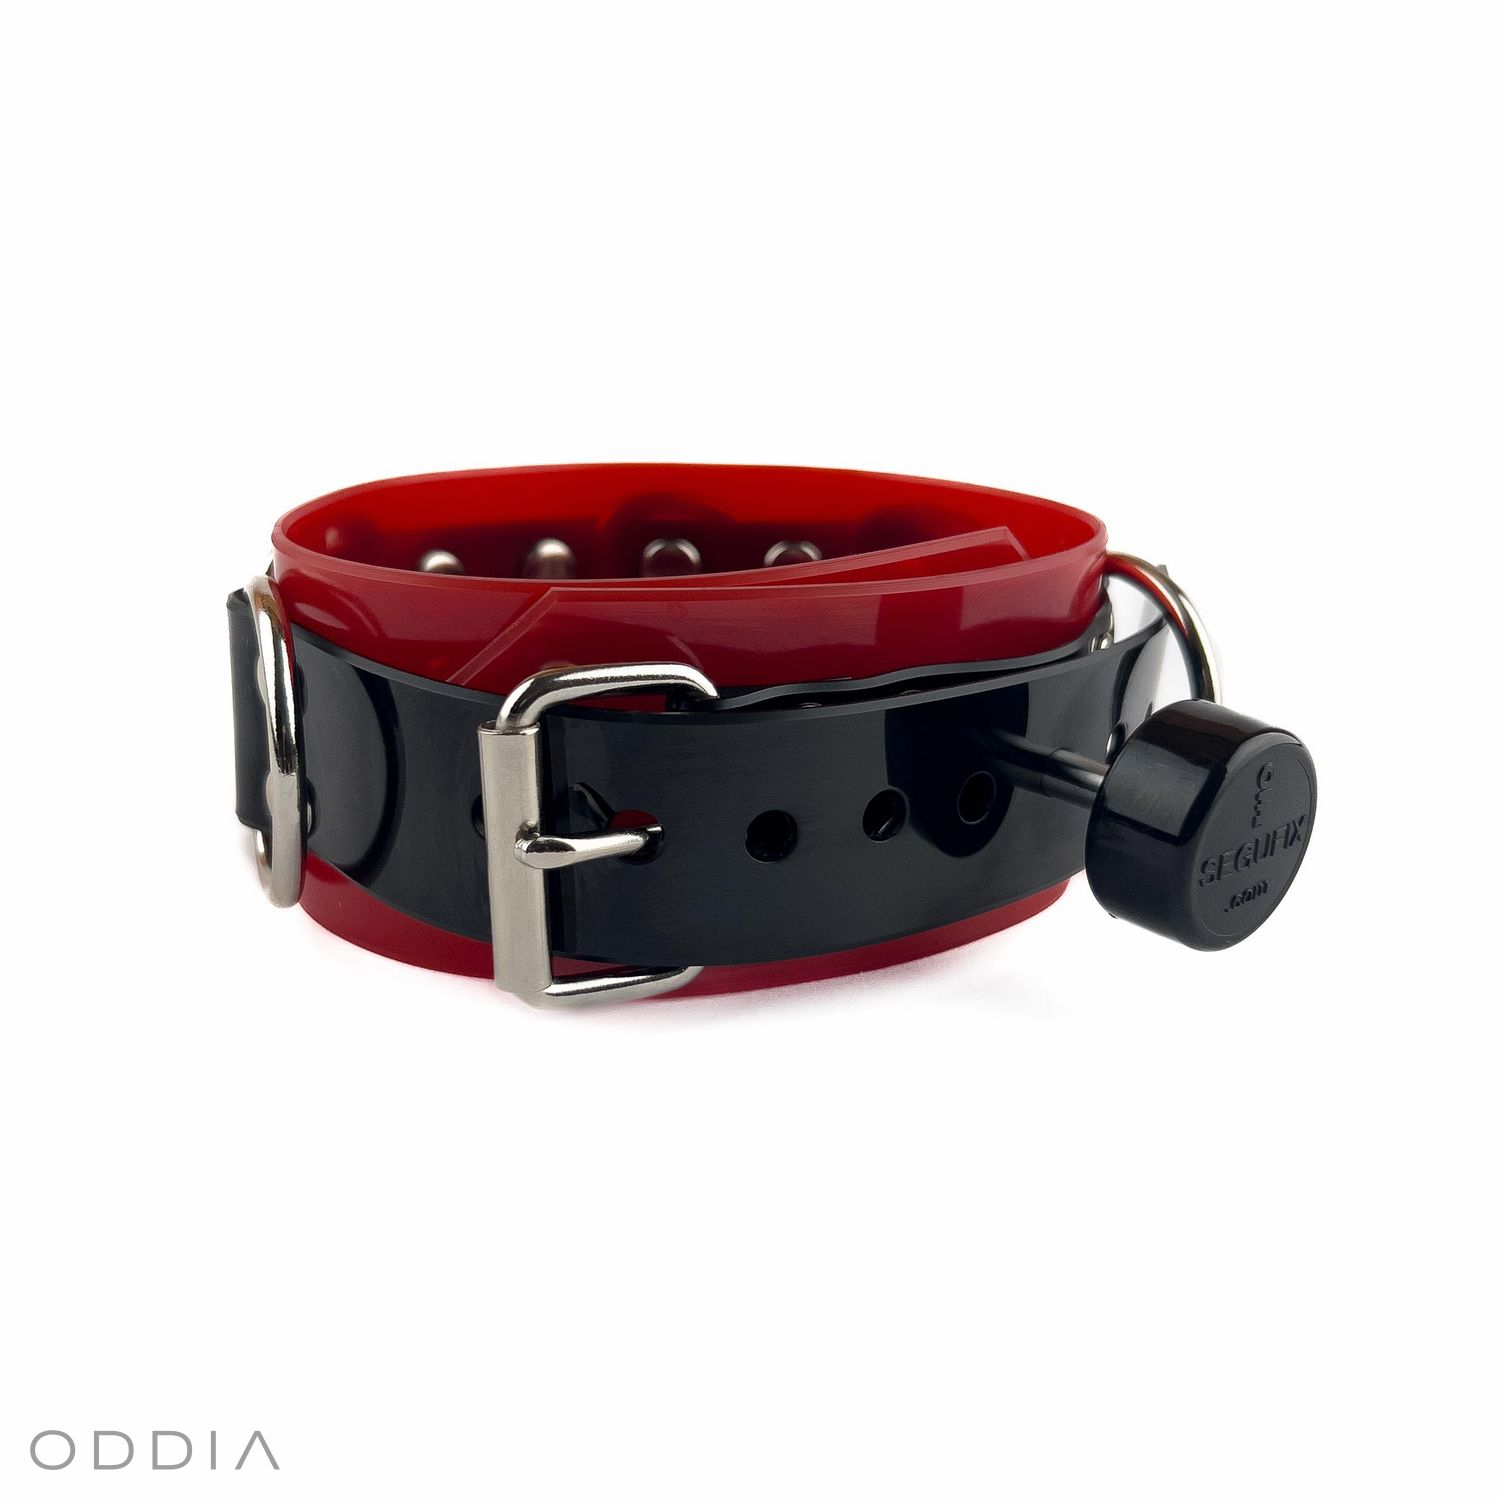 5 cm wide burgundy-black BDSM collar with rings around its circumference, equipped with a magnetic lock